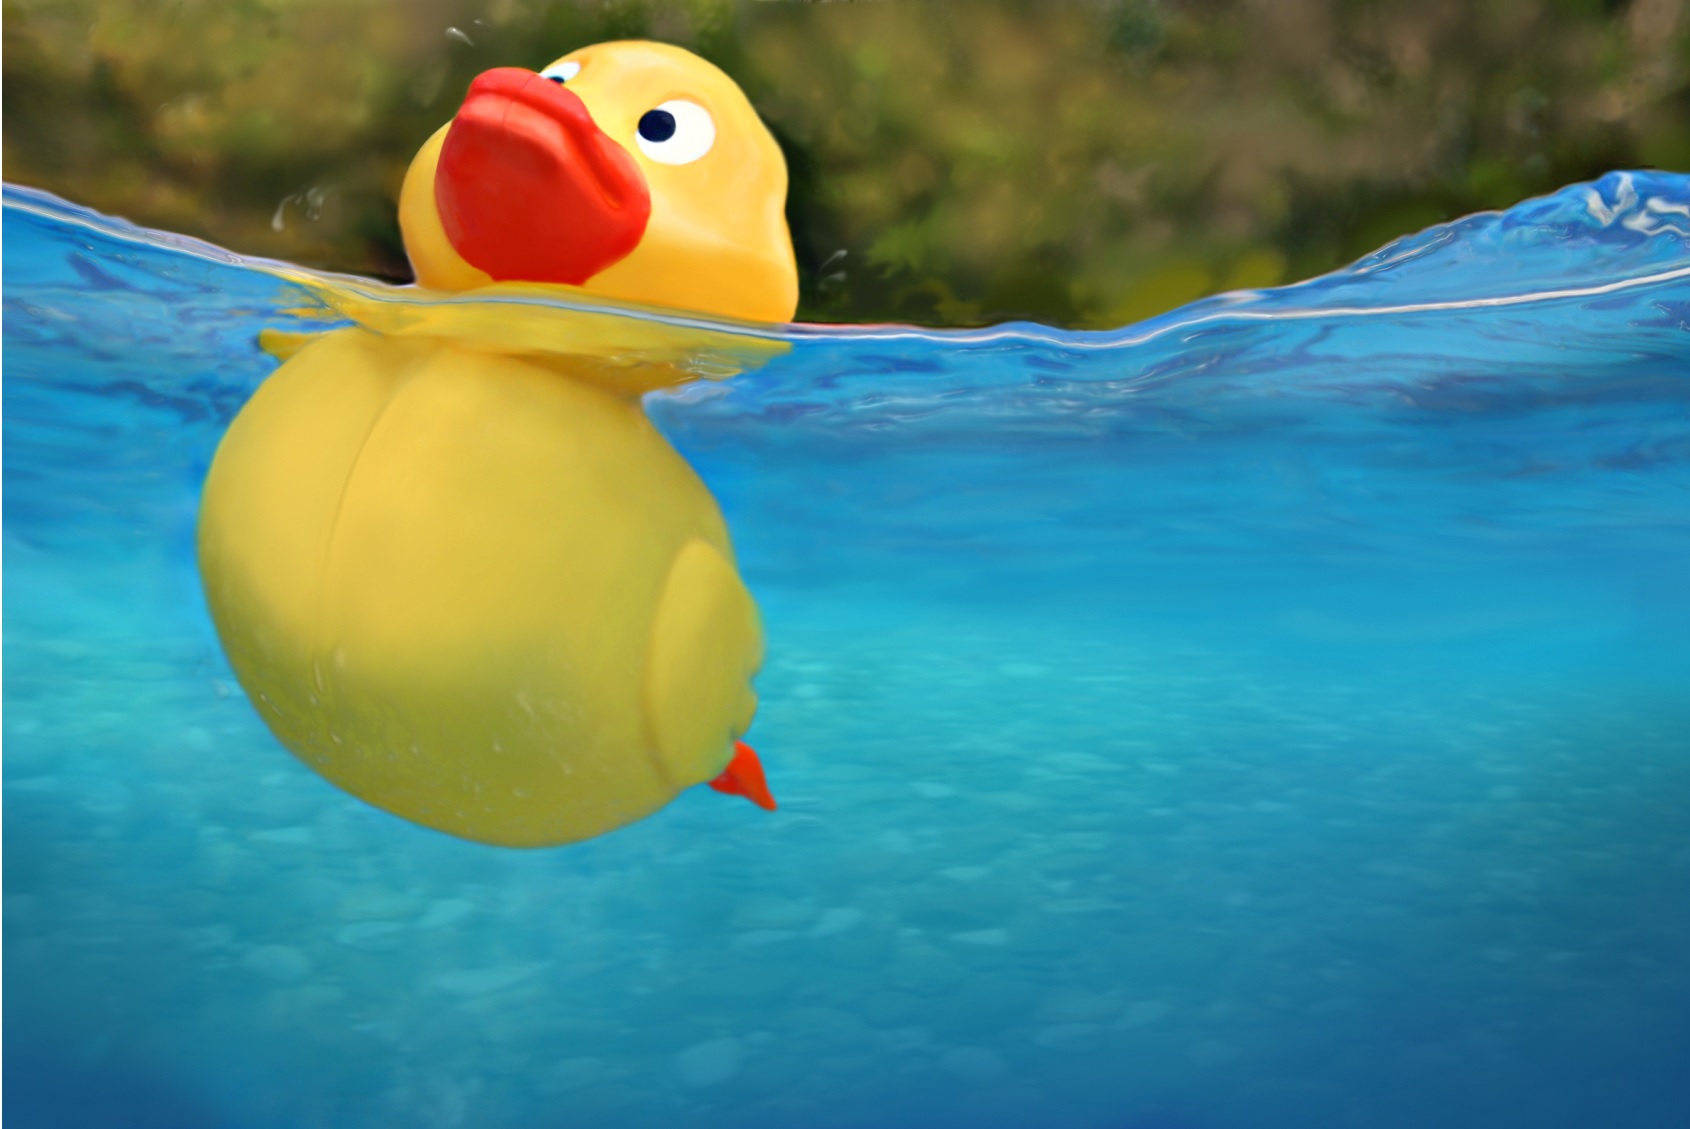 yellow rubber duck floating in blue water